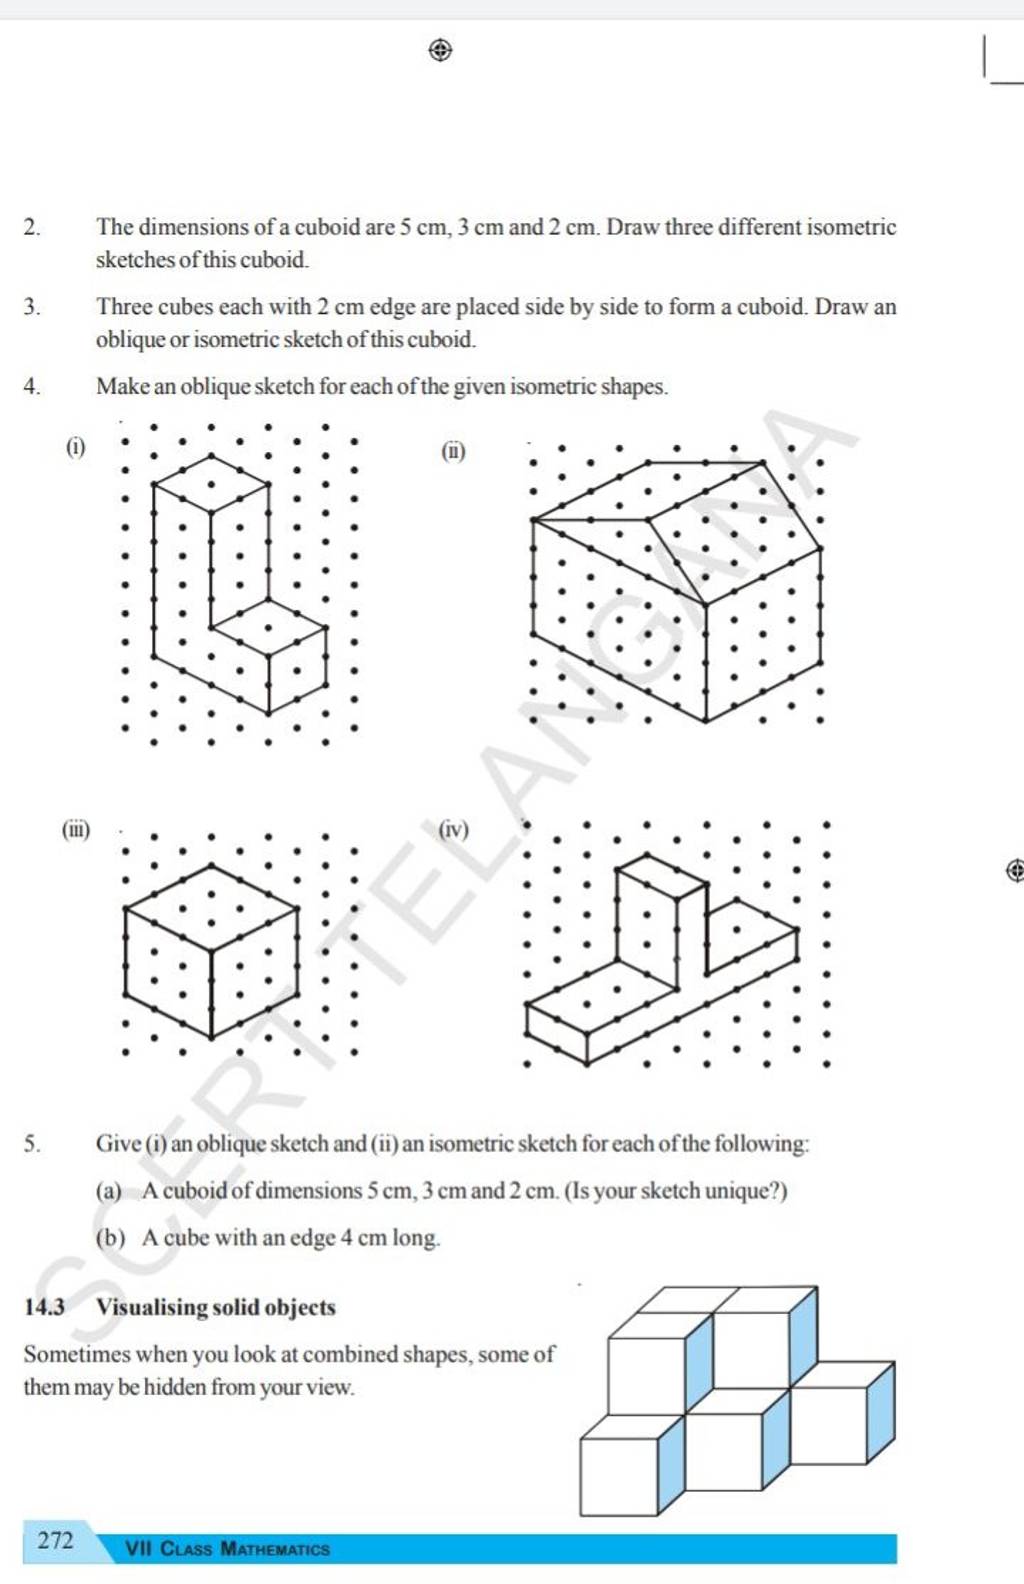 Give (i) an oblique sketch and (ii) an isometric sketch for each of the  following:(a) A cuboid of dimensions 5 cm,3 cm, and 2 cm. (Is your sketch  unique?)(b) A cube with